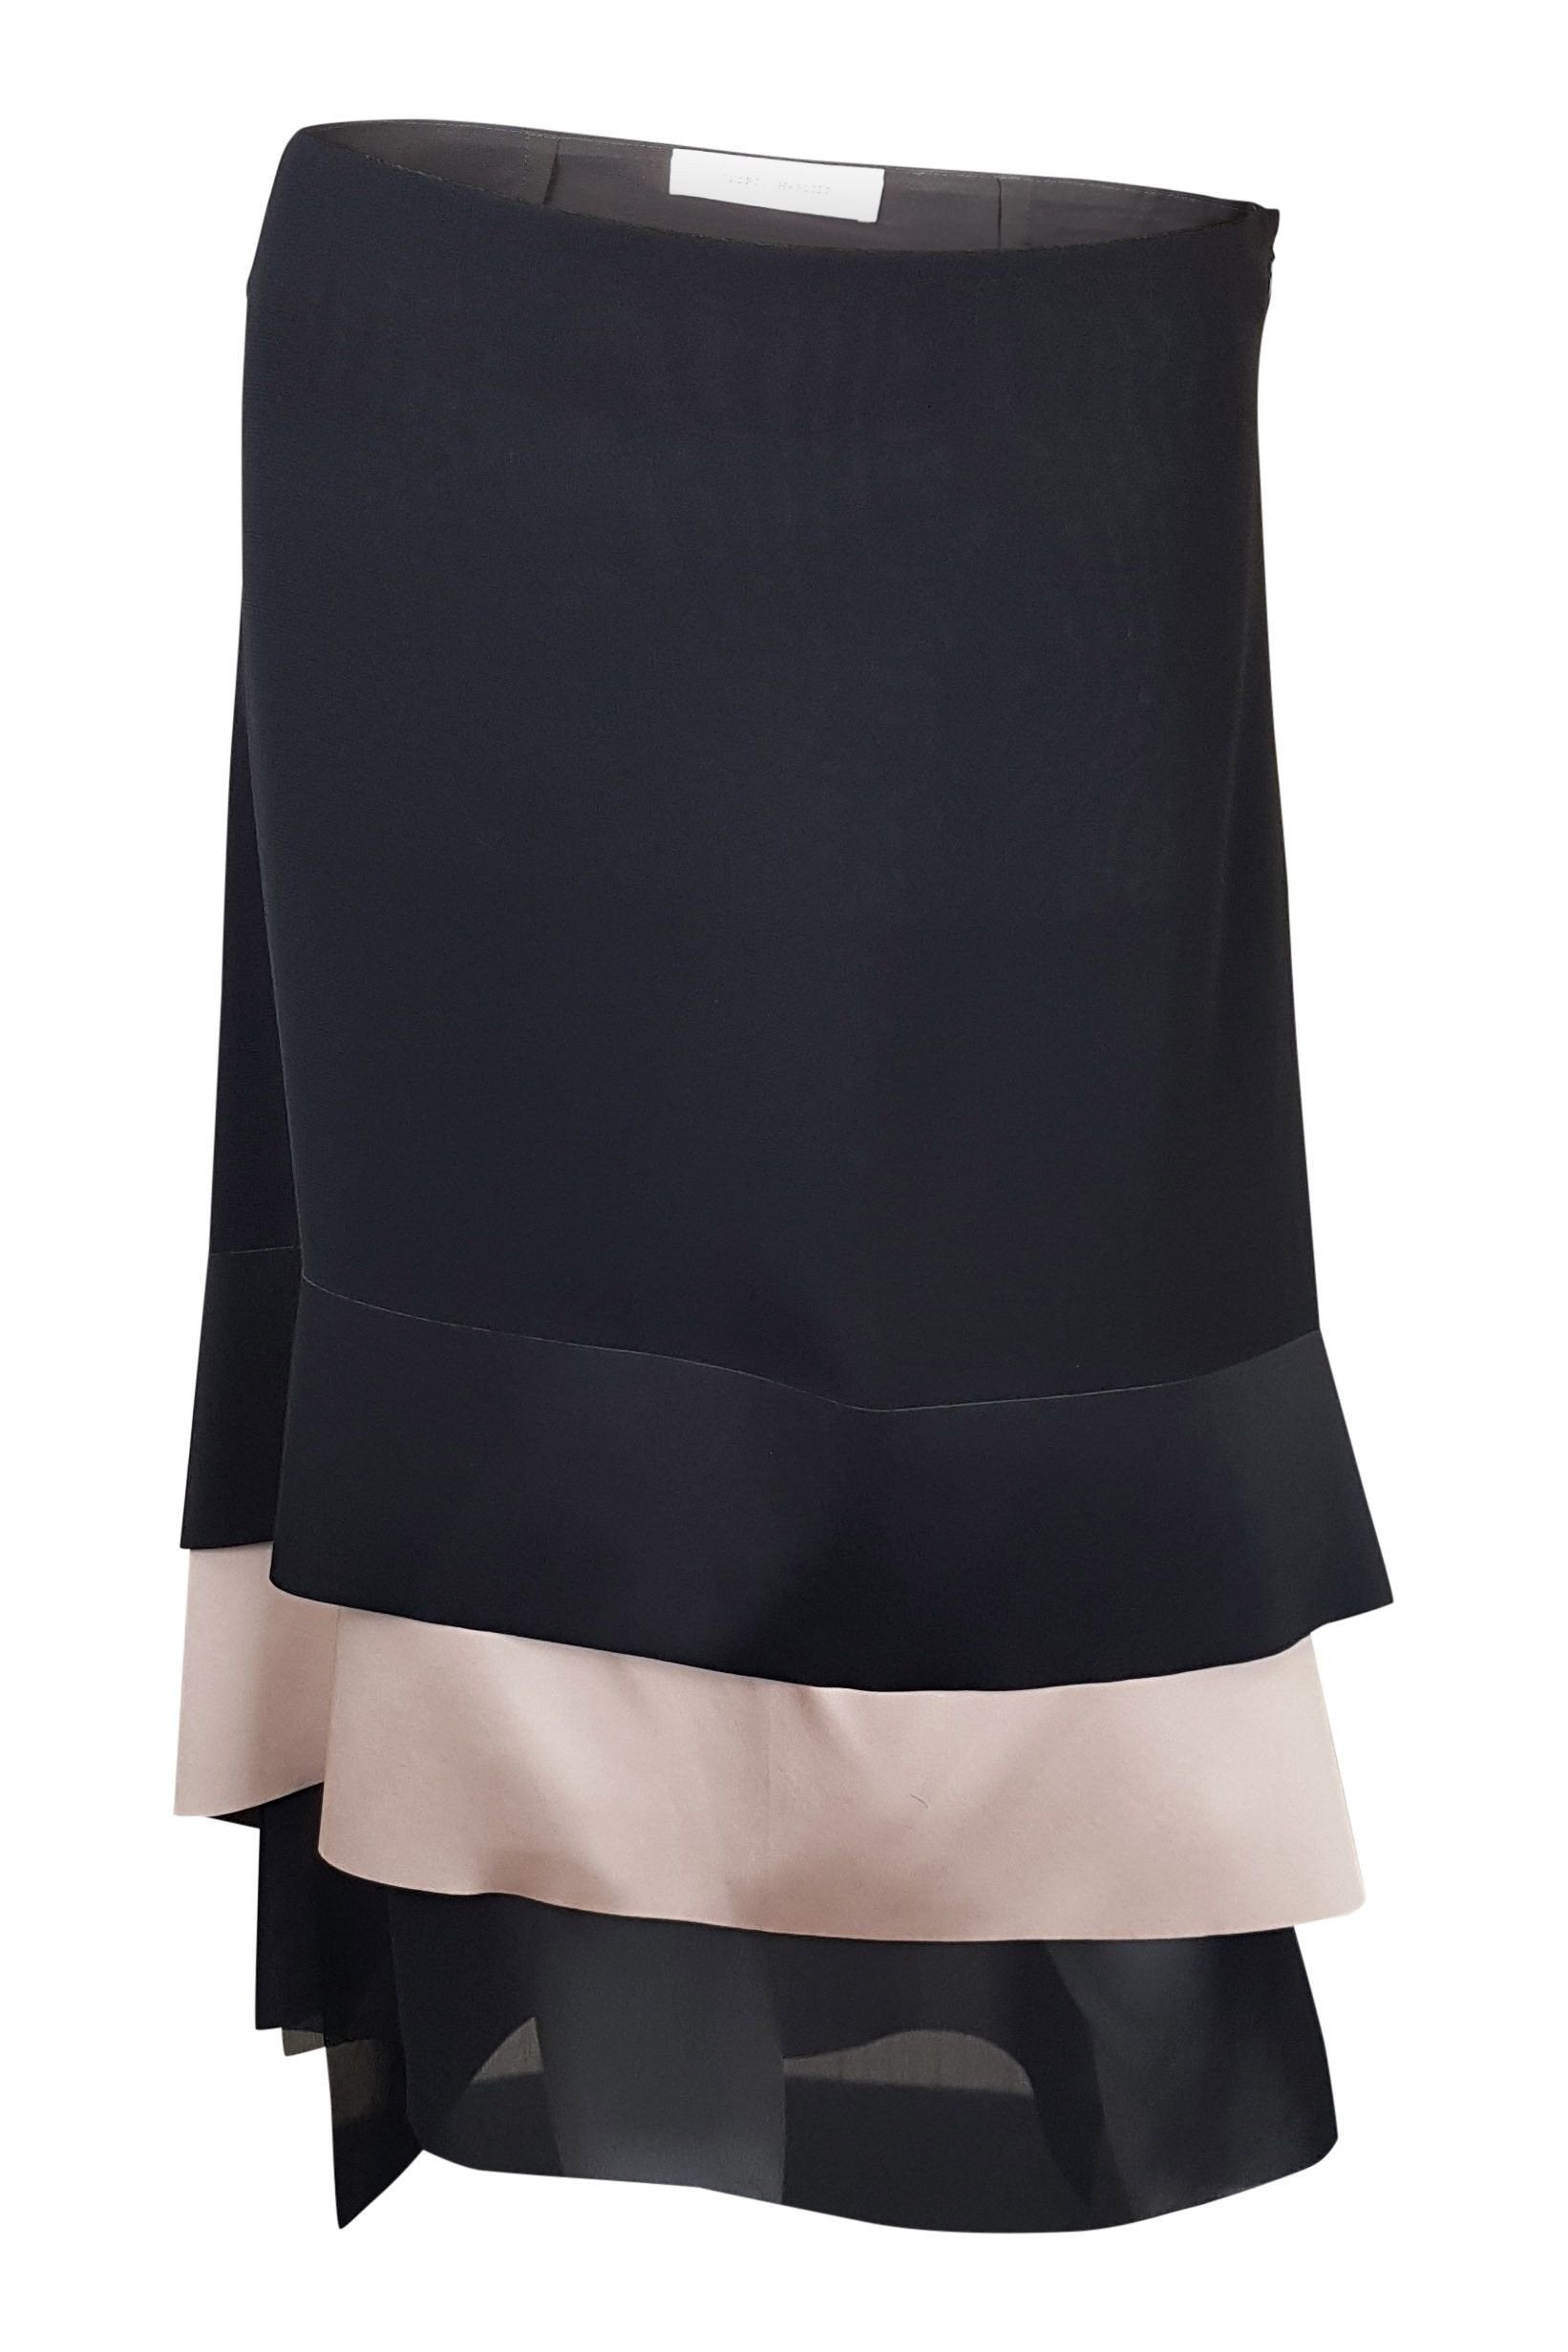 CEDRIC CHARLIER Black and Pink Chiffon Layered Skirt (UK 8)-Cedric Charlier-The Freperie